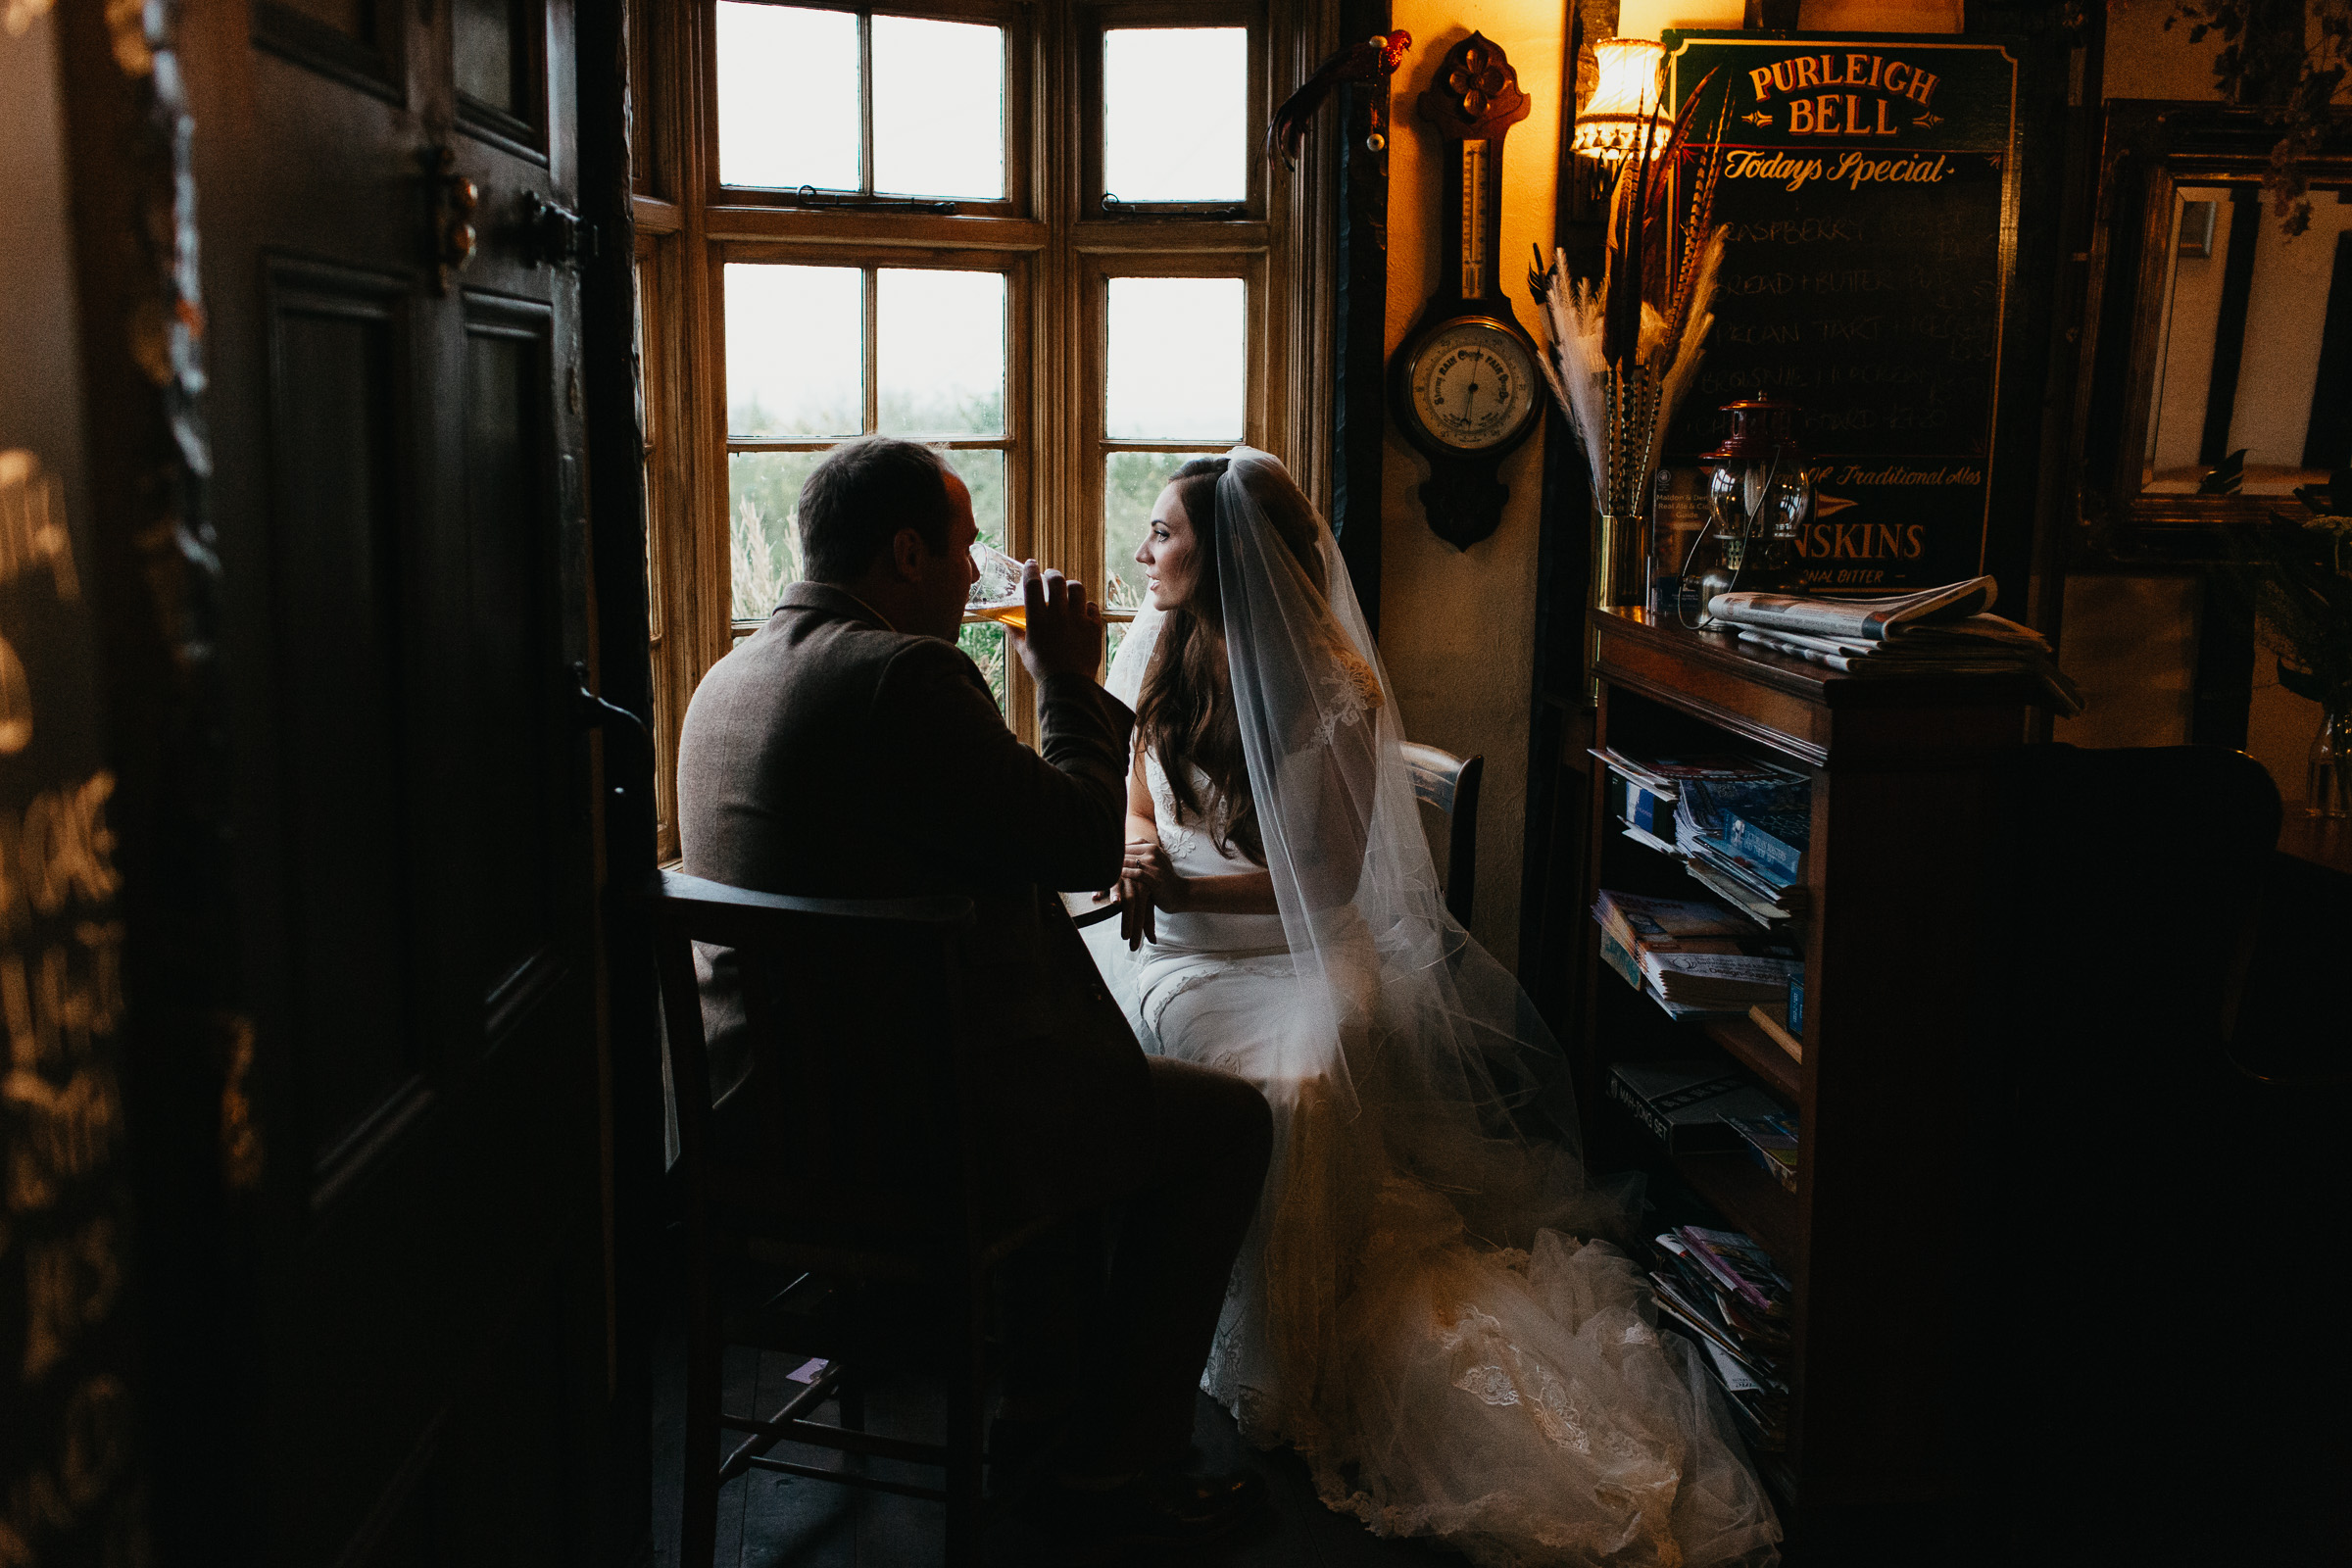 A bride is sat in the window of the Purleigh Bell in Essex looking out of the window. She is wearing a Galia Lahav dress. The groom is sat opposite his new wife and is drinking a pint.